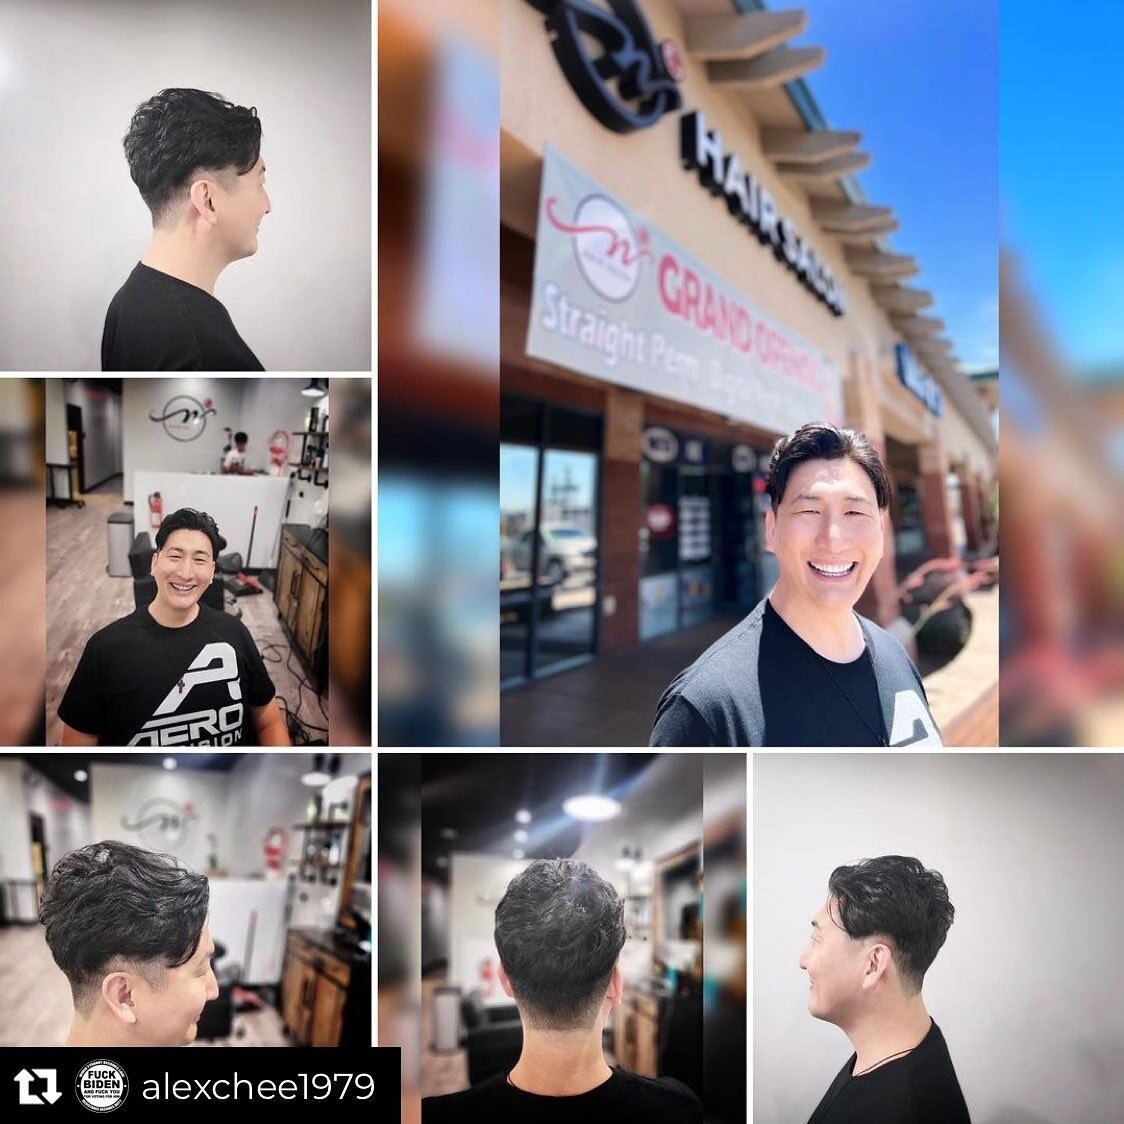 Repost from @alexchee1979
&bull;
Our dear friend, who&rsquo;s been the amazing hair stylist of my wife @succes73 and I for over 10 years, just opened up her own salon in Mesa, AZ!!🥰🎉 WALK-INS WELCOME!!👍🏻

Choi Su-yeun
@nhairsalon.az 
(480) 687-30